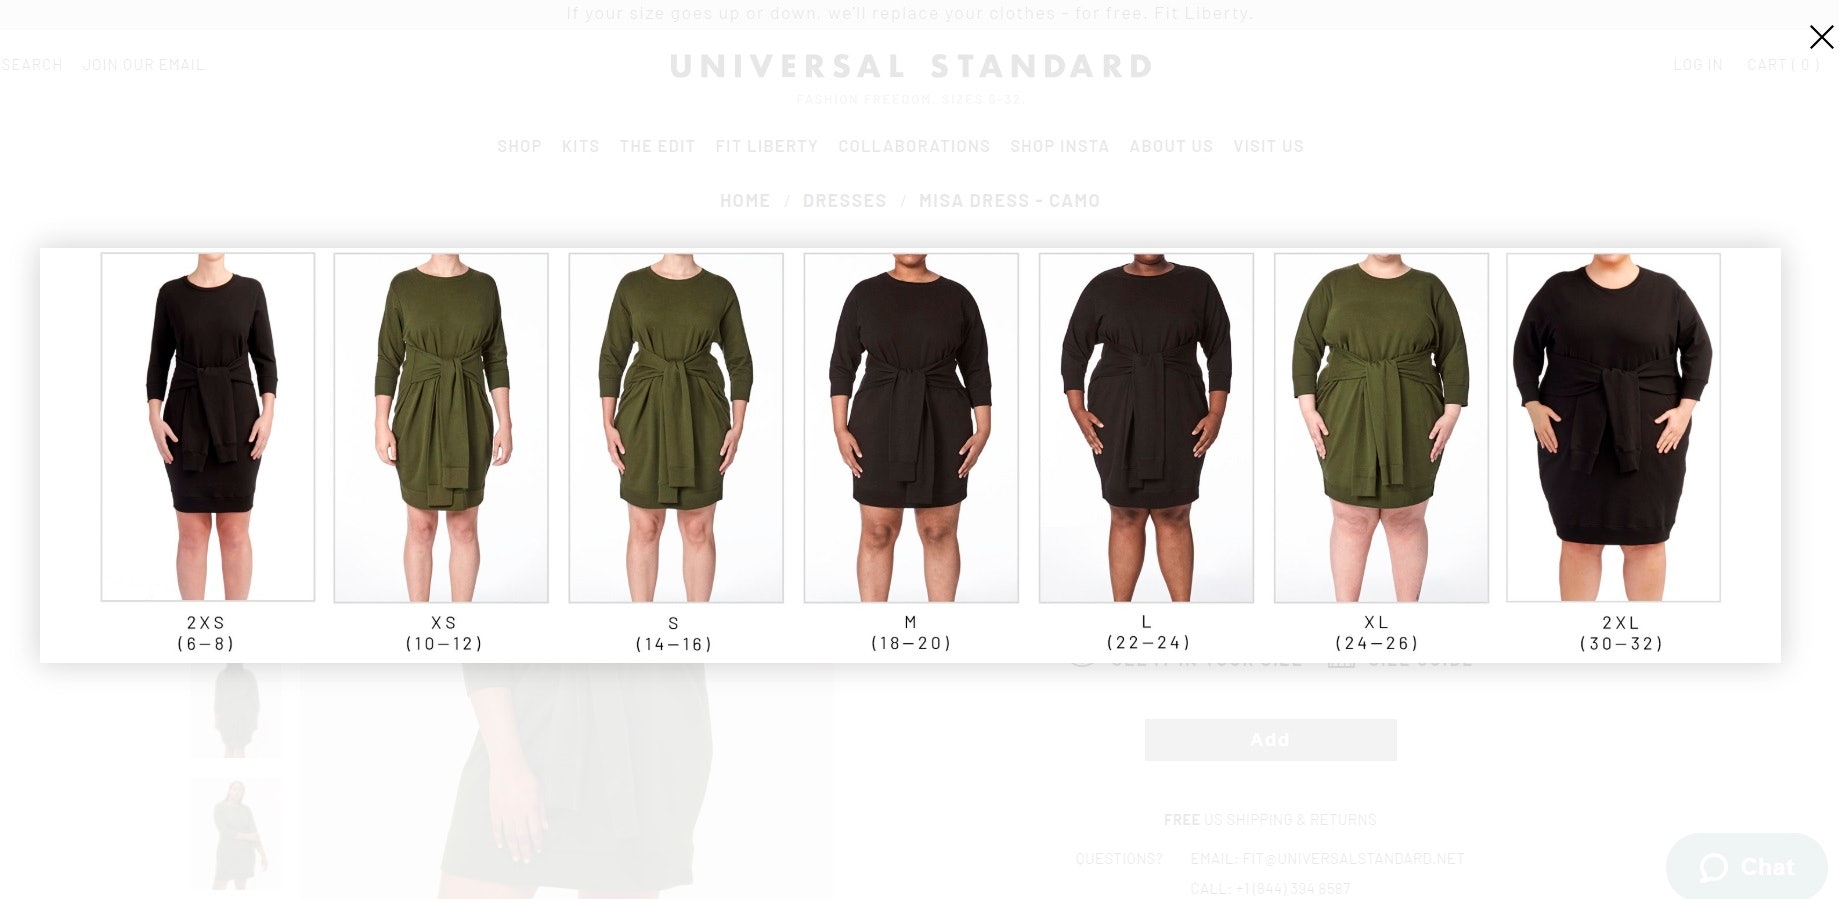 What Are Universal Standard's Sizes 